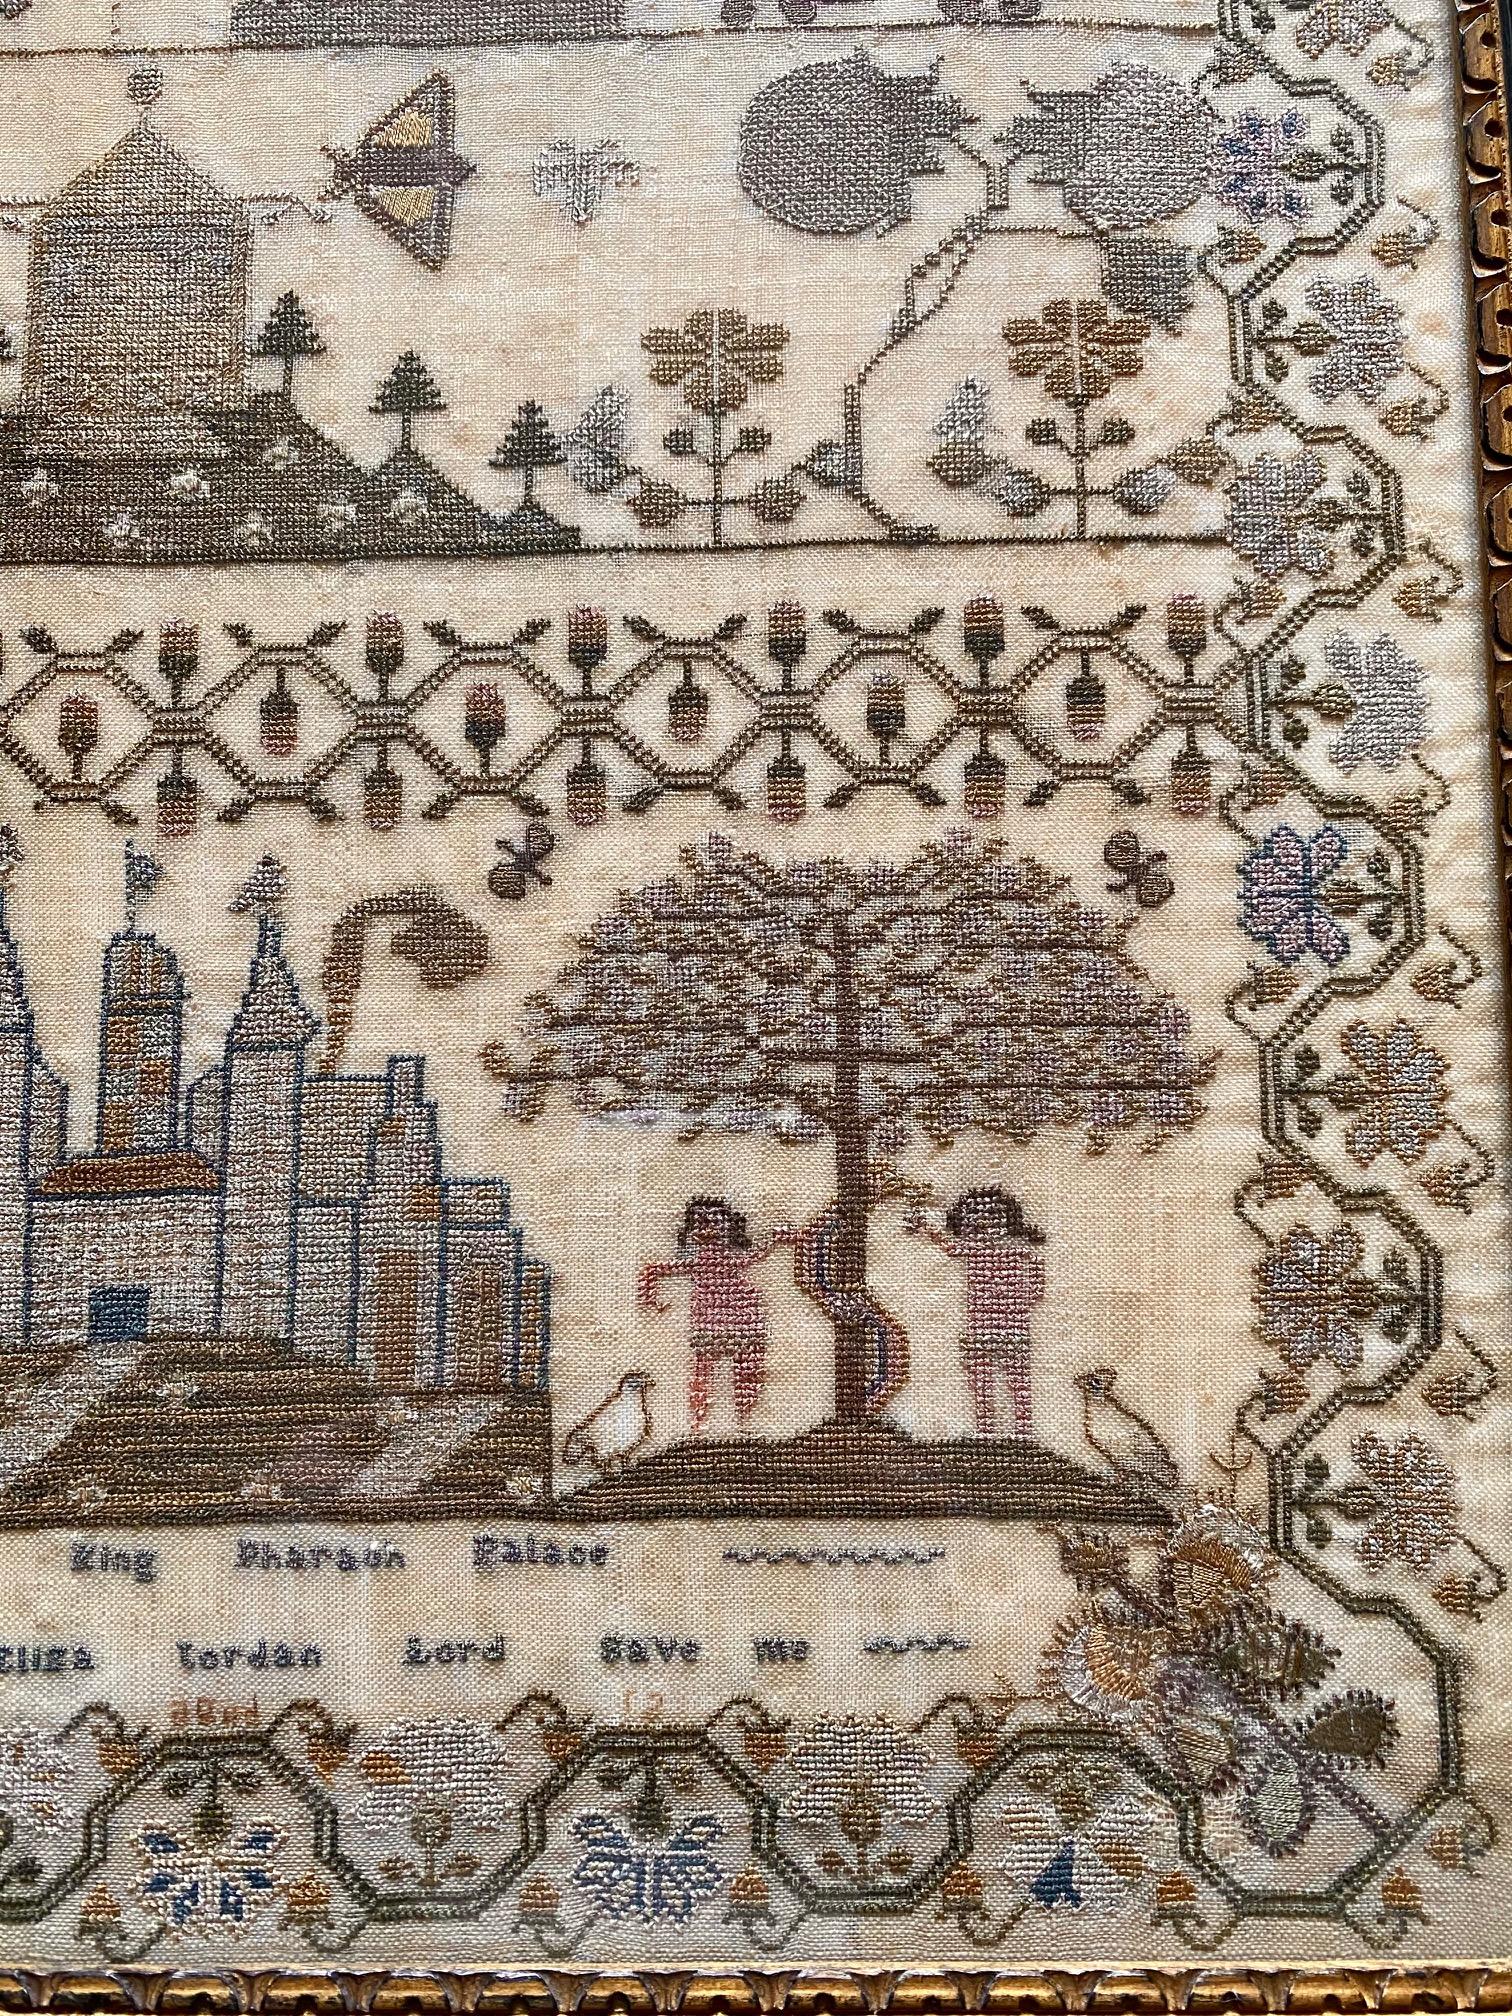 Antique American needlework sampler by Eliza Jordan, aged 12, late 18th century, a very fine and fanciful pictorial needlework sampler on linen panel featuring a great variety of animals, birds, delicate butterflies, a palace, Adam and Eve with